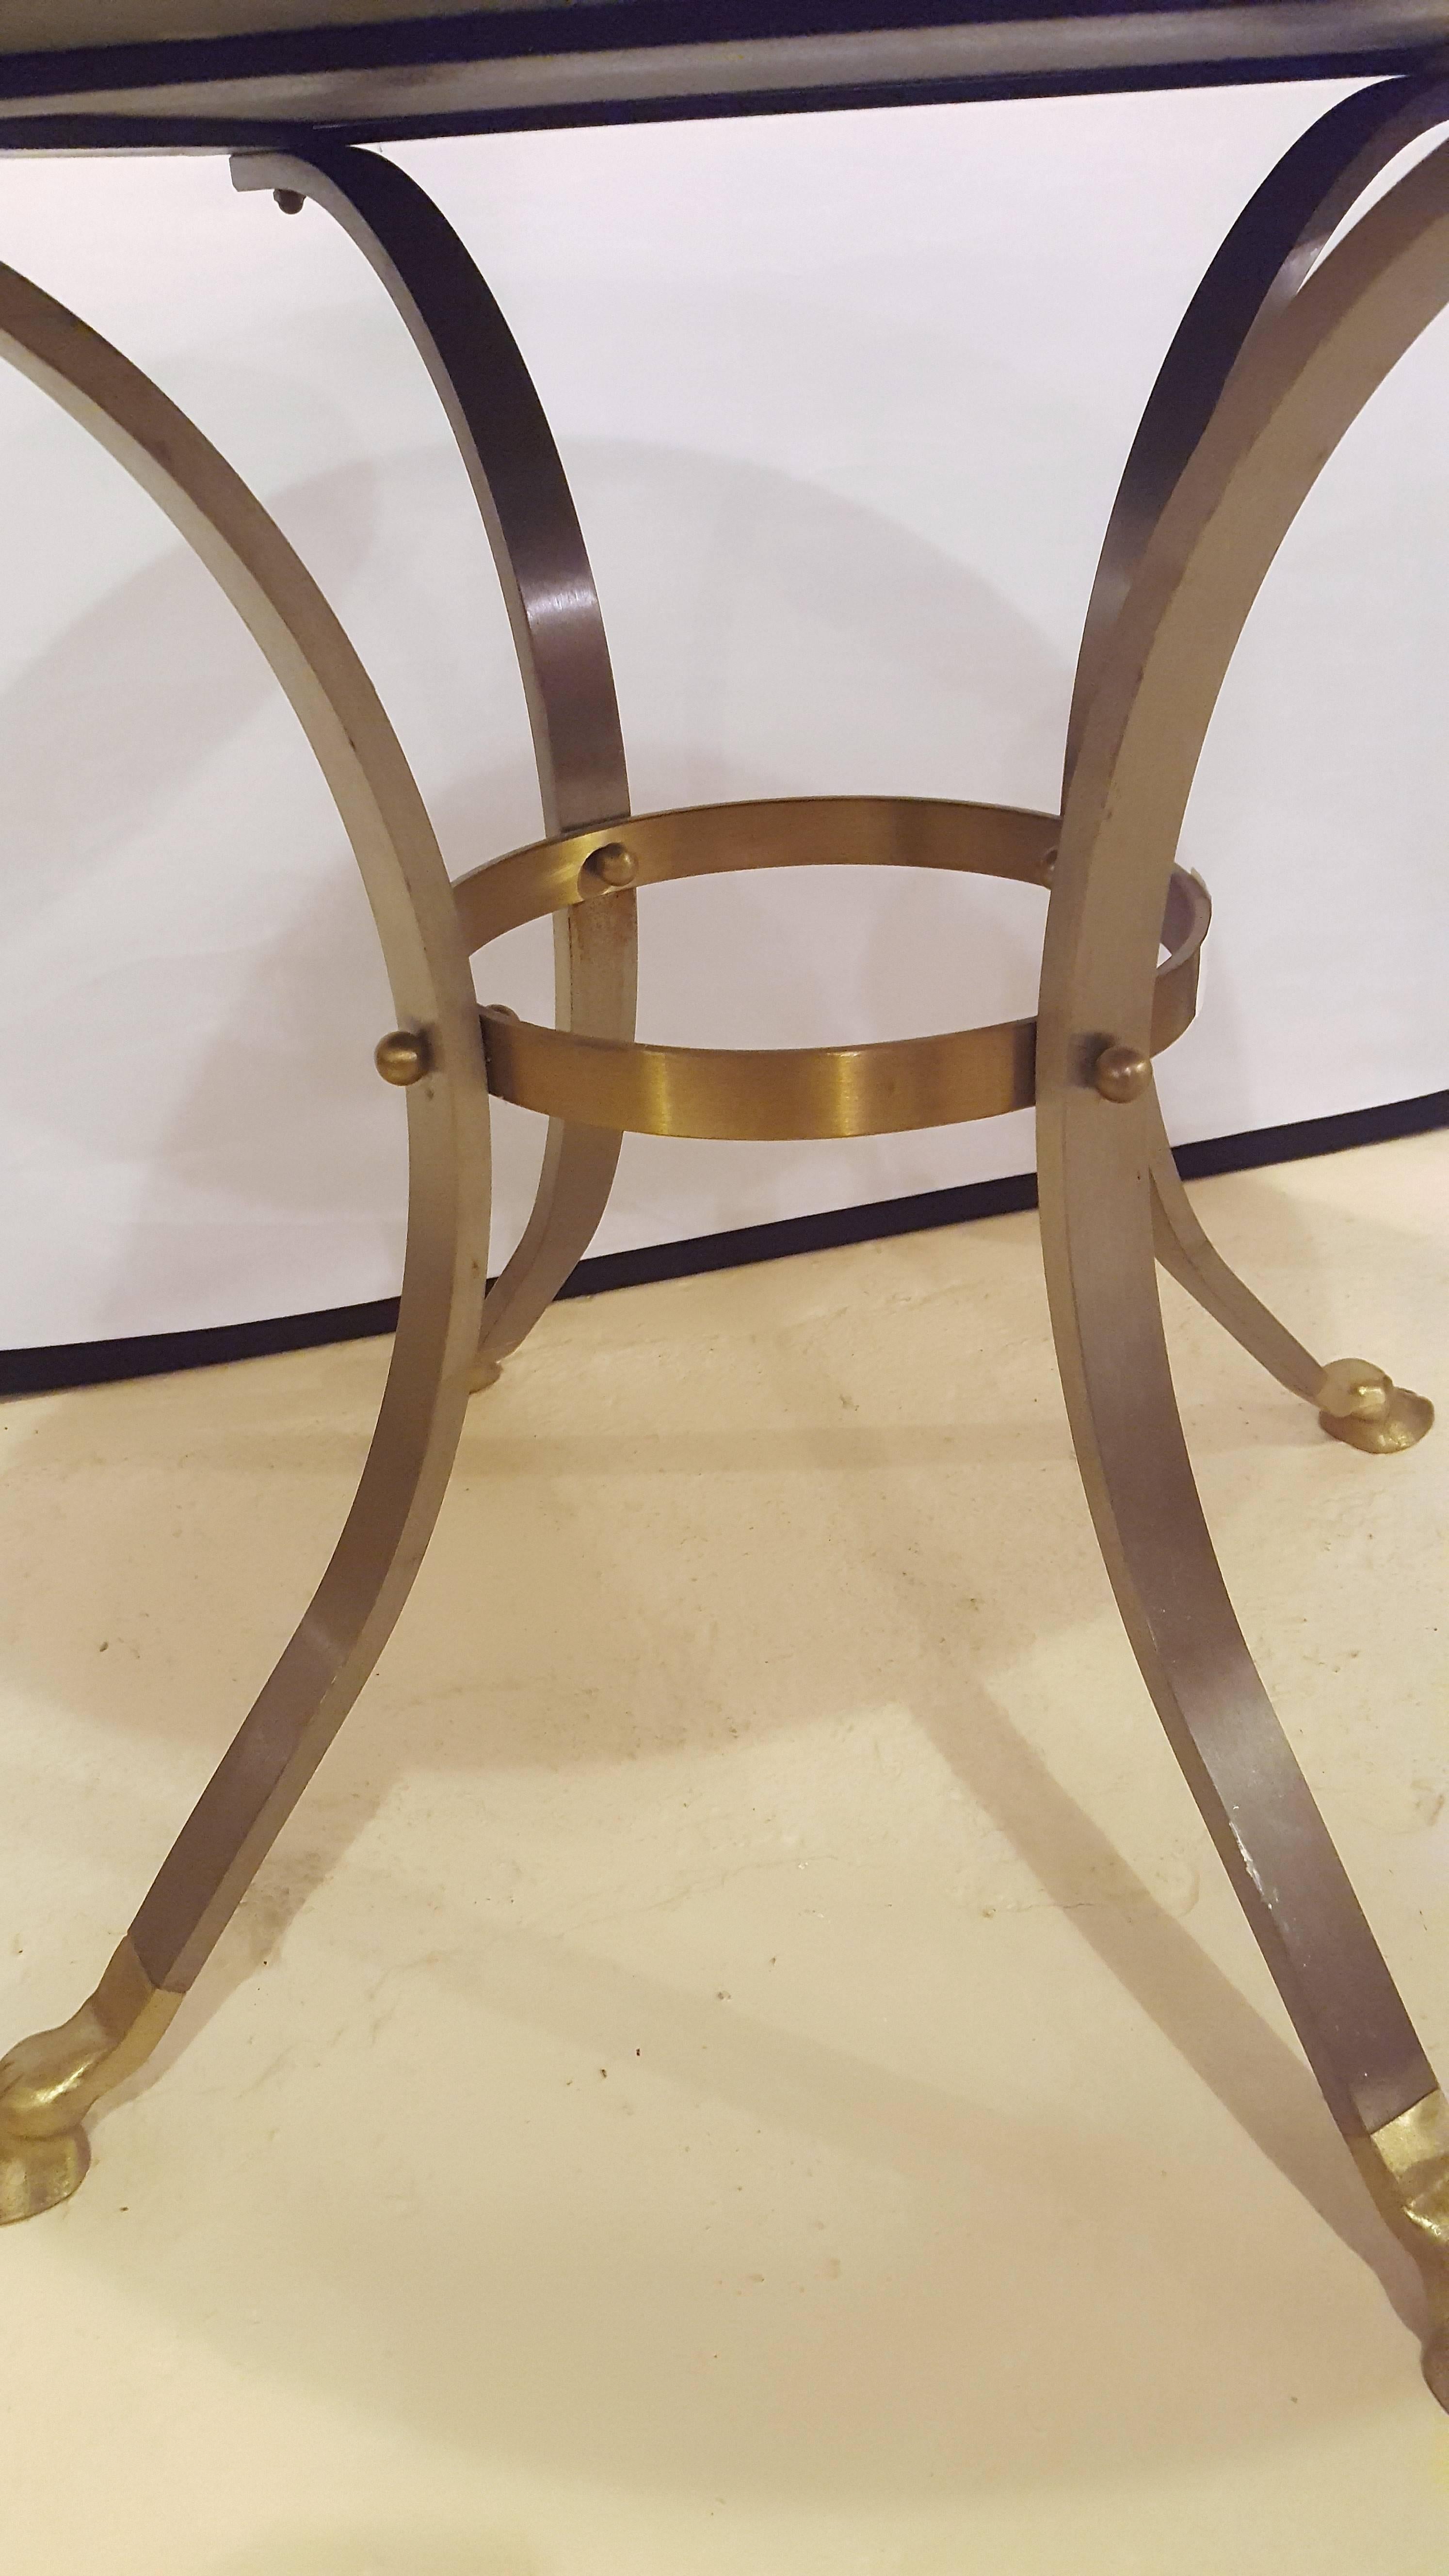 20th Century Brass and Steel Ebony Marble Top Gueridon Table / End Table Attibuted to Jansen